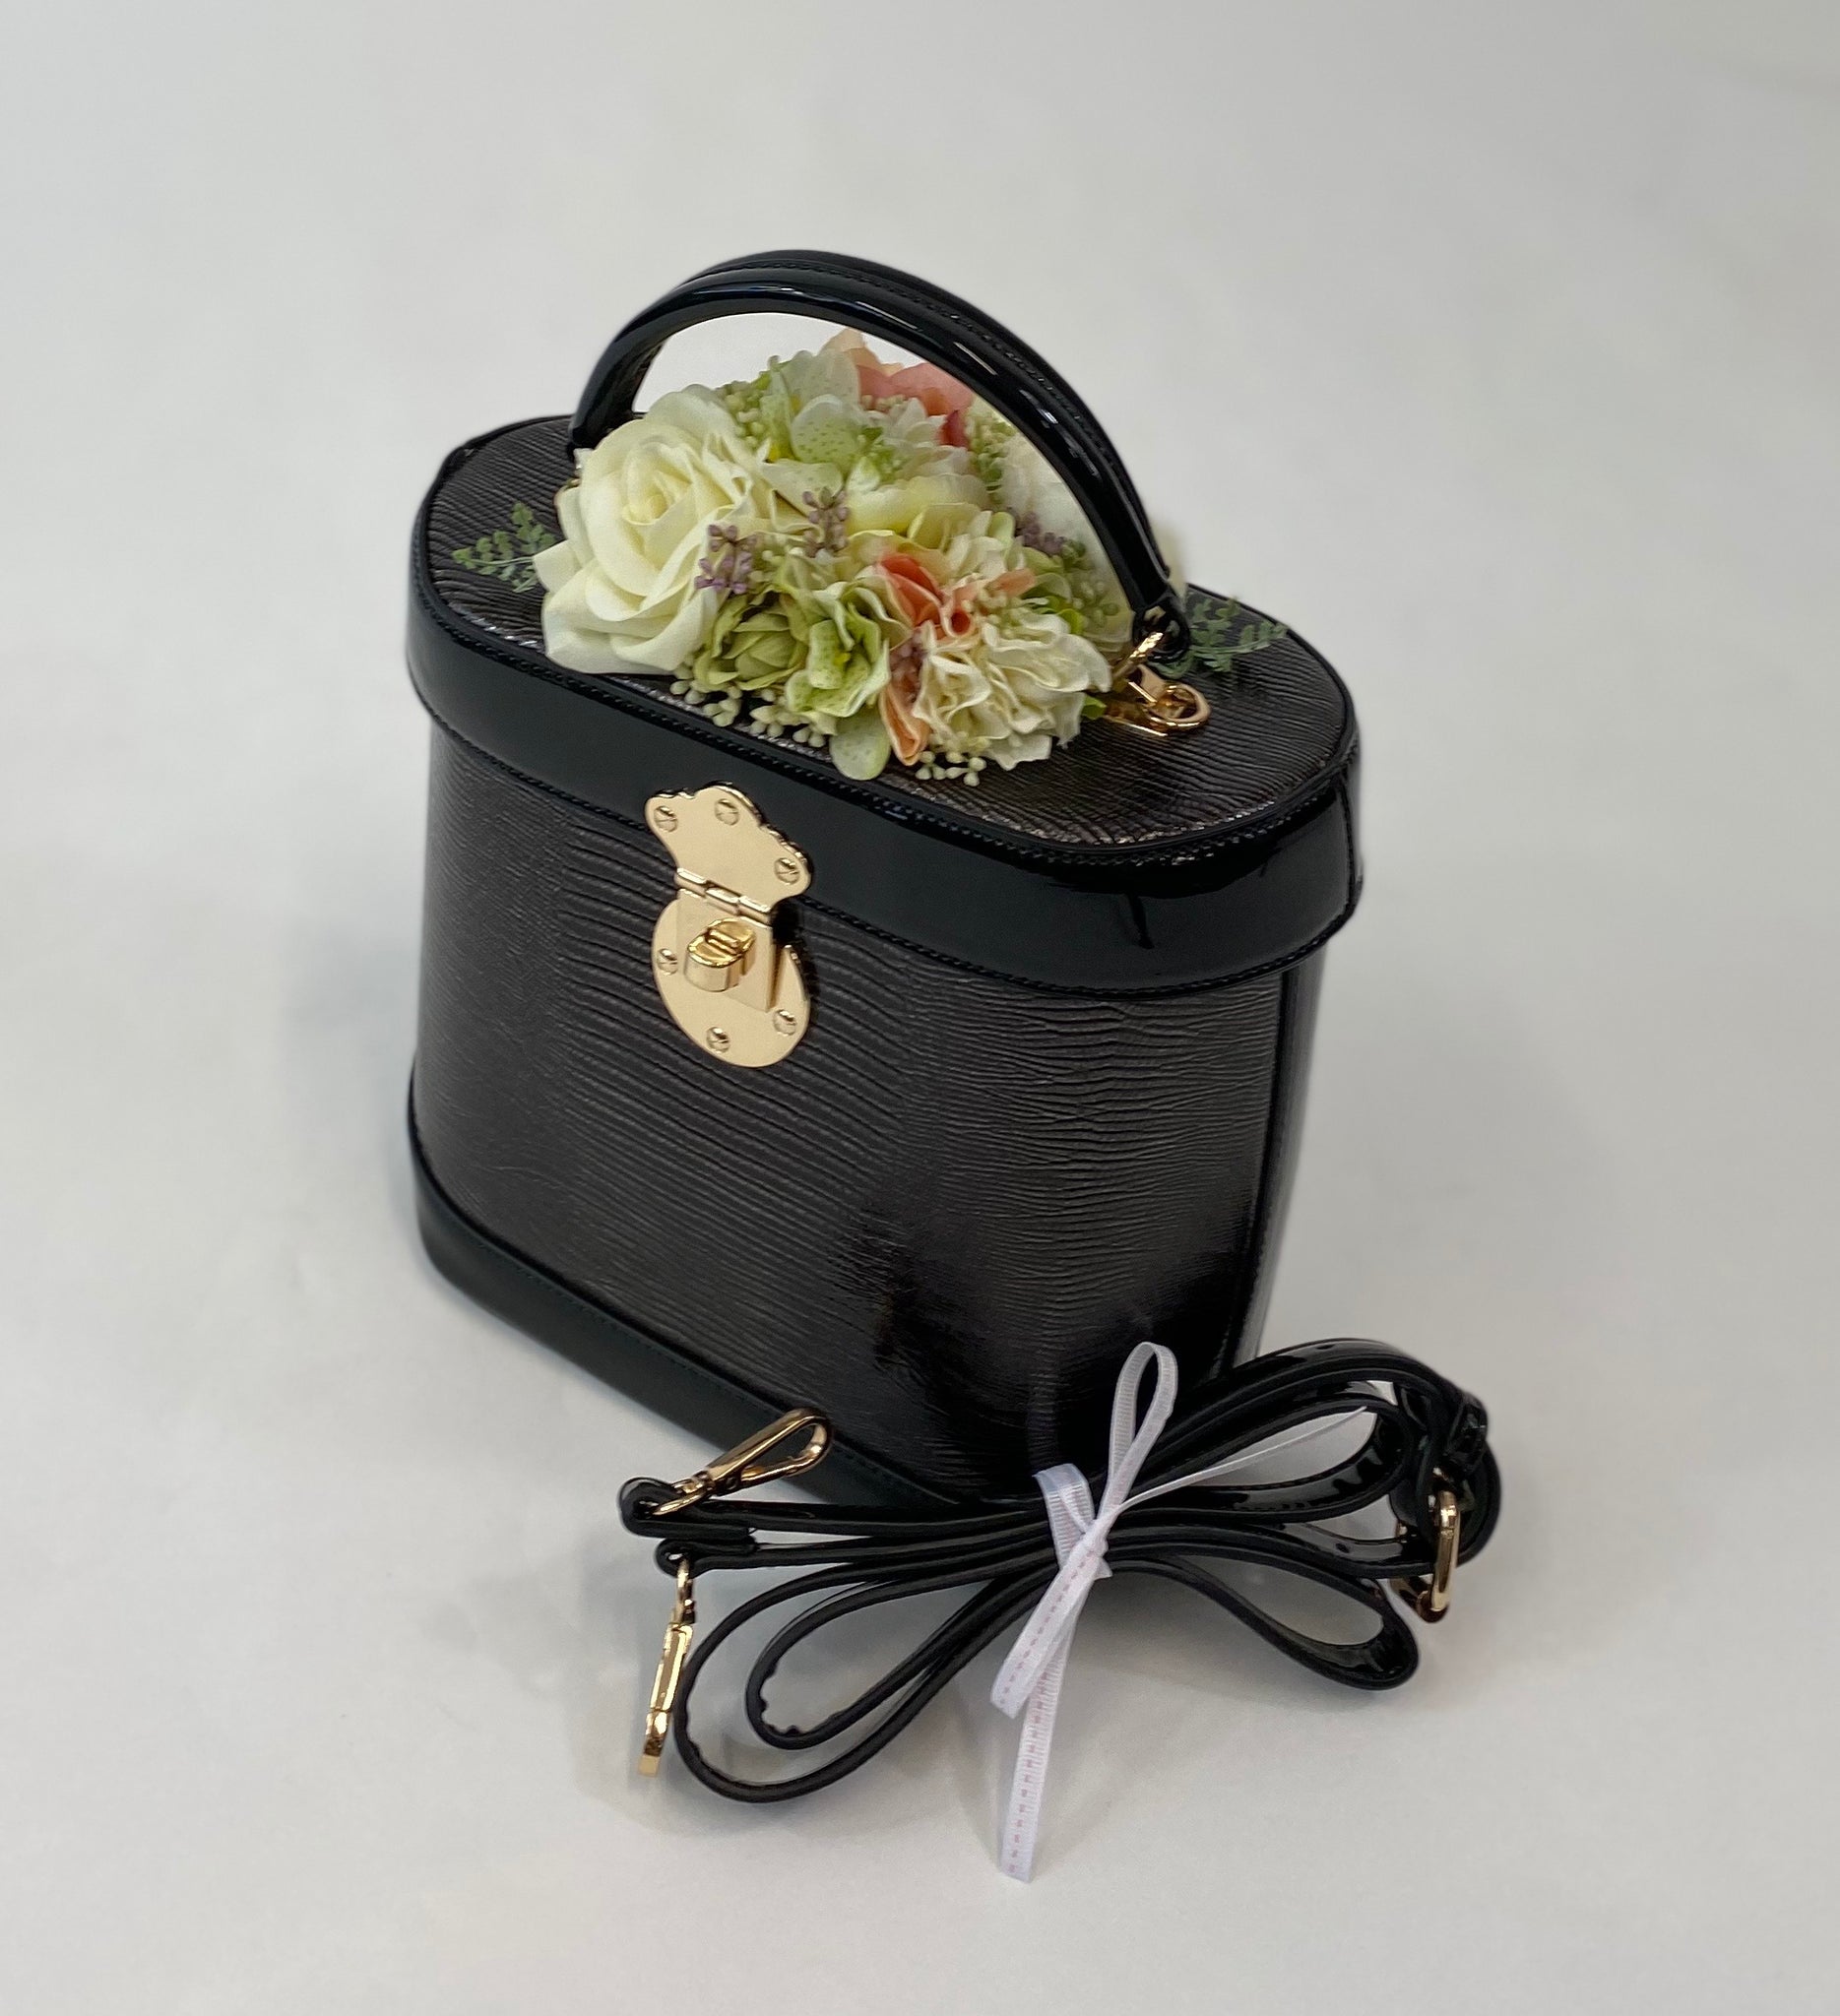 Classic Vintage Style Charlotte Handbag In Classic Black With Blooms - True and authentic vintage style clothing, inspired by the Classic styles of CC41 , WW2 and the fun 1950s RocknRoll era, for everyday wear plus events like Goodwood Revival, Twinwood Festival and Viva Las Vegas Rockabilly Weekend Rock n Romance Classic Bags In Bloom